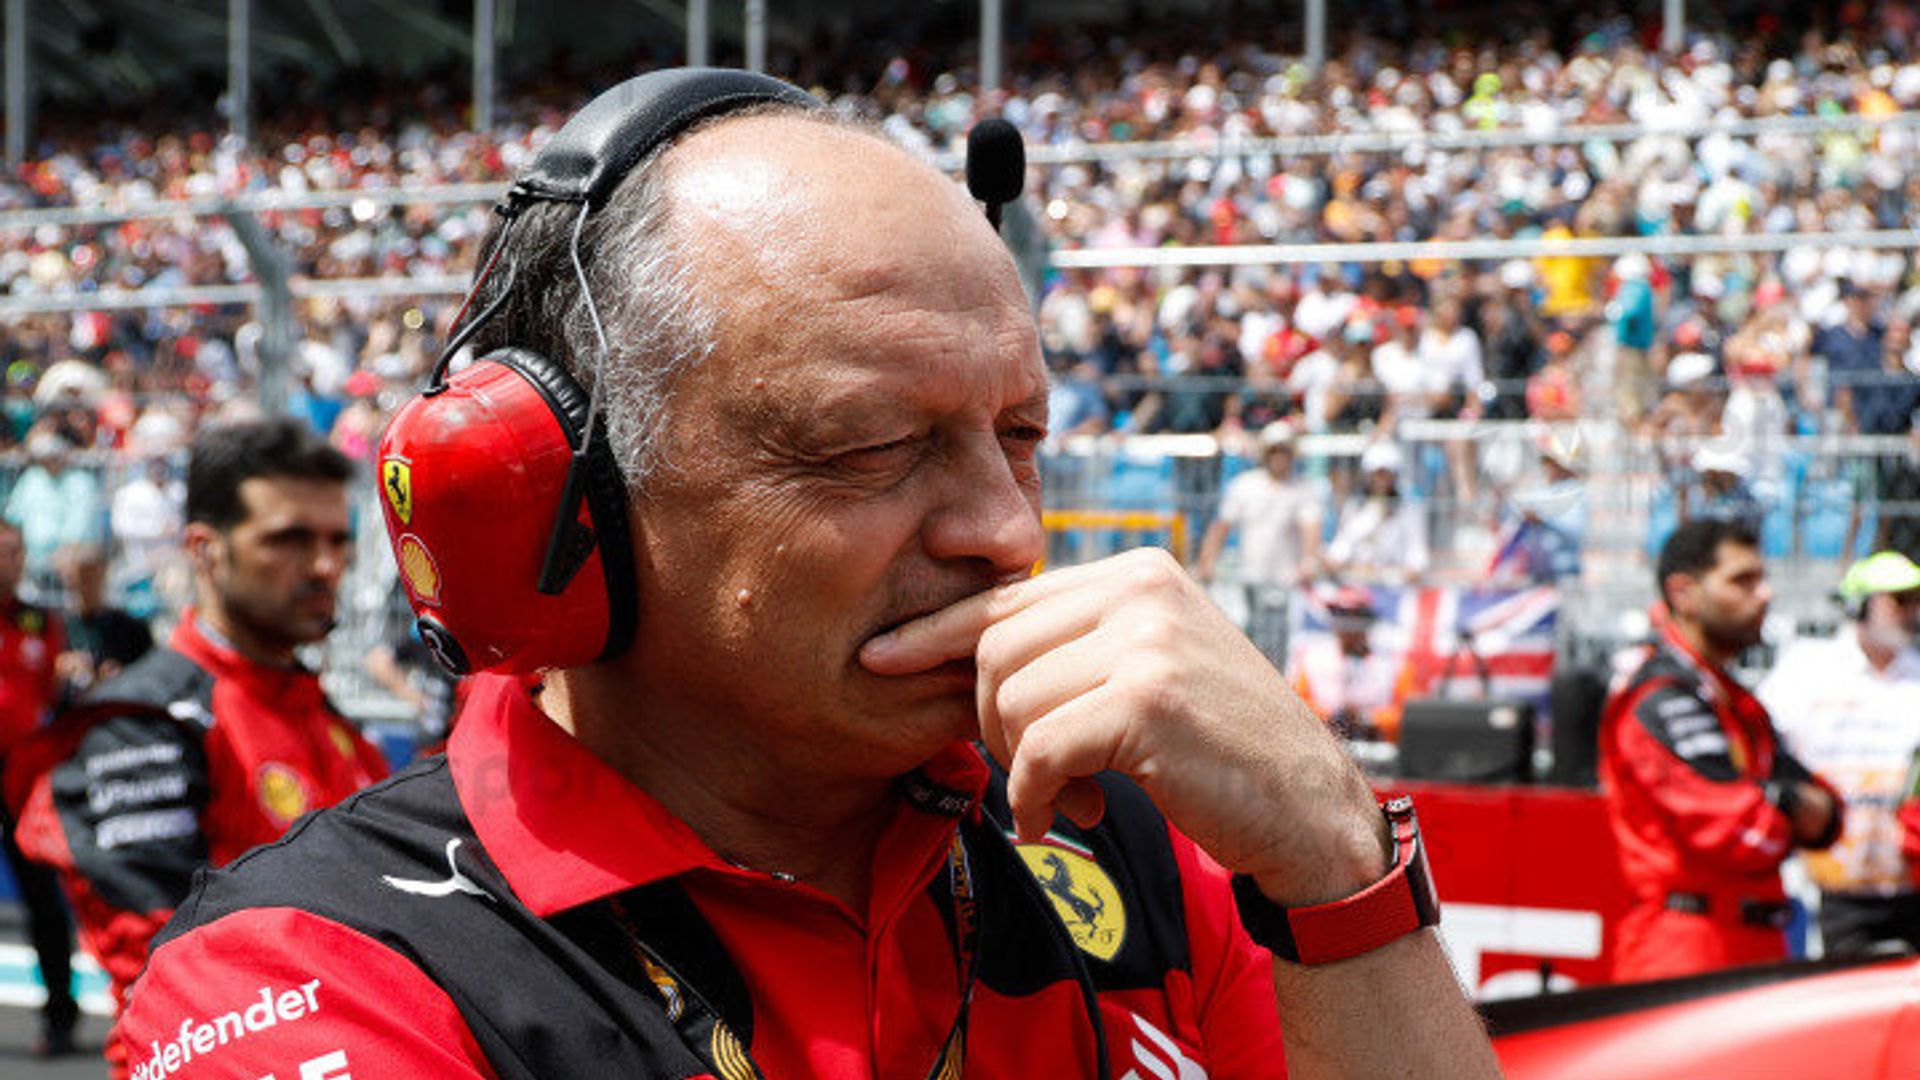 Vasseur admits Ferrari problems are 'very difficult to understand'